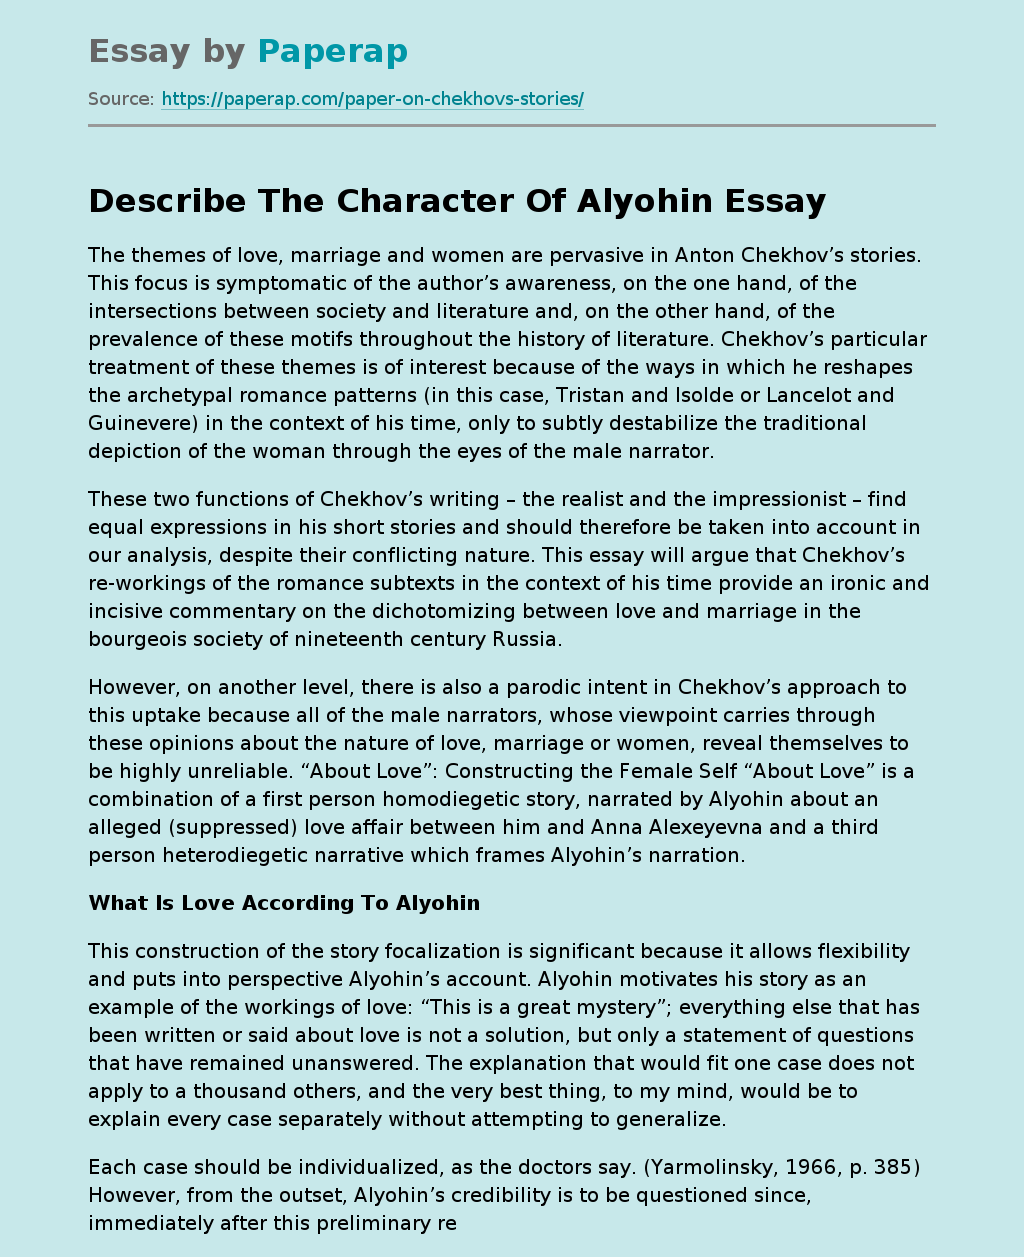 Describe The Character Of Alyohin